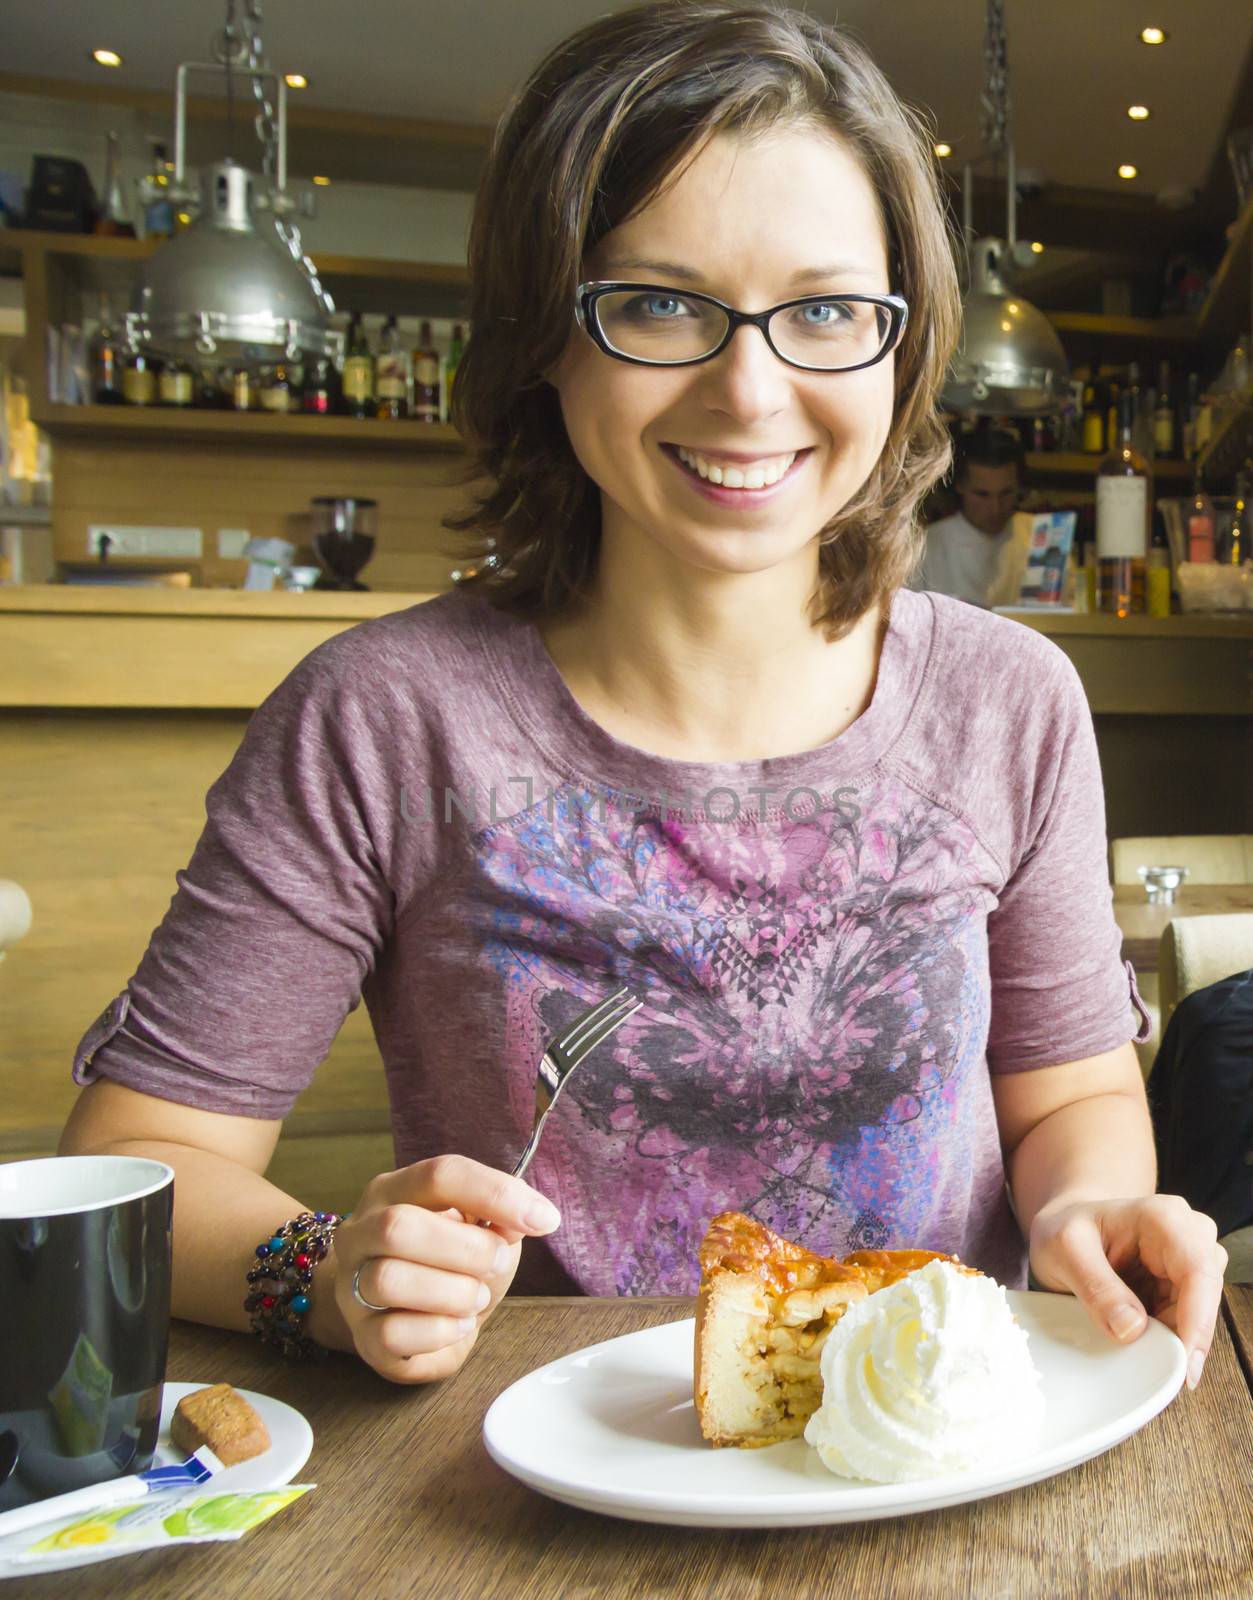 Smiling woman at cafe eating apple cake dessert with cream by Tetyana